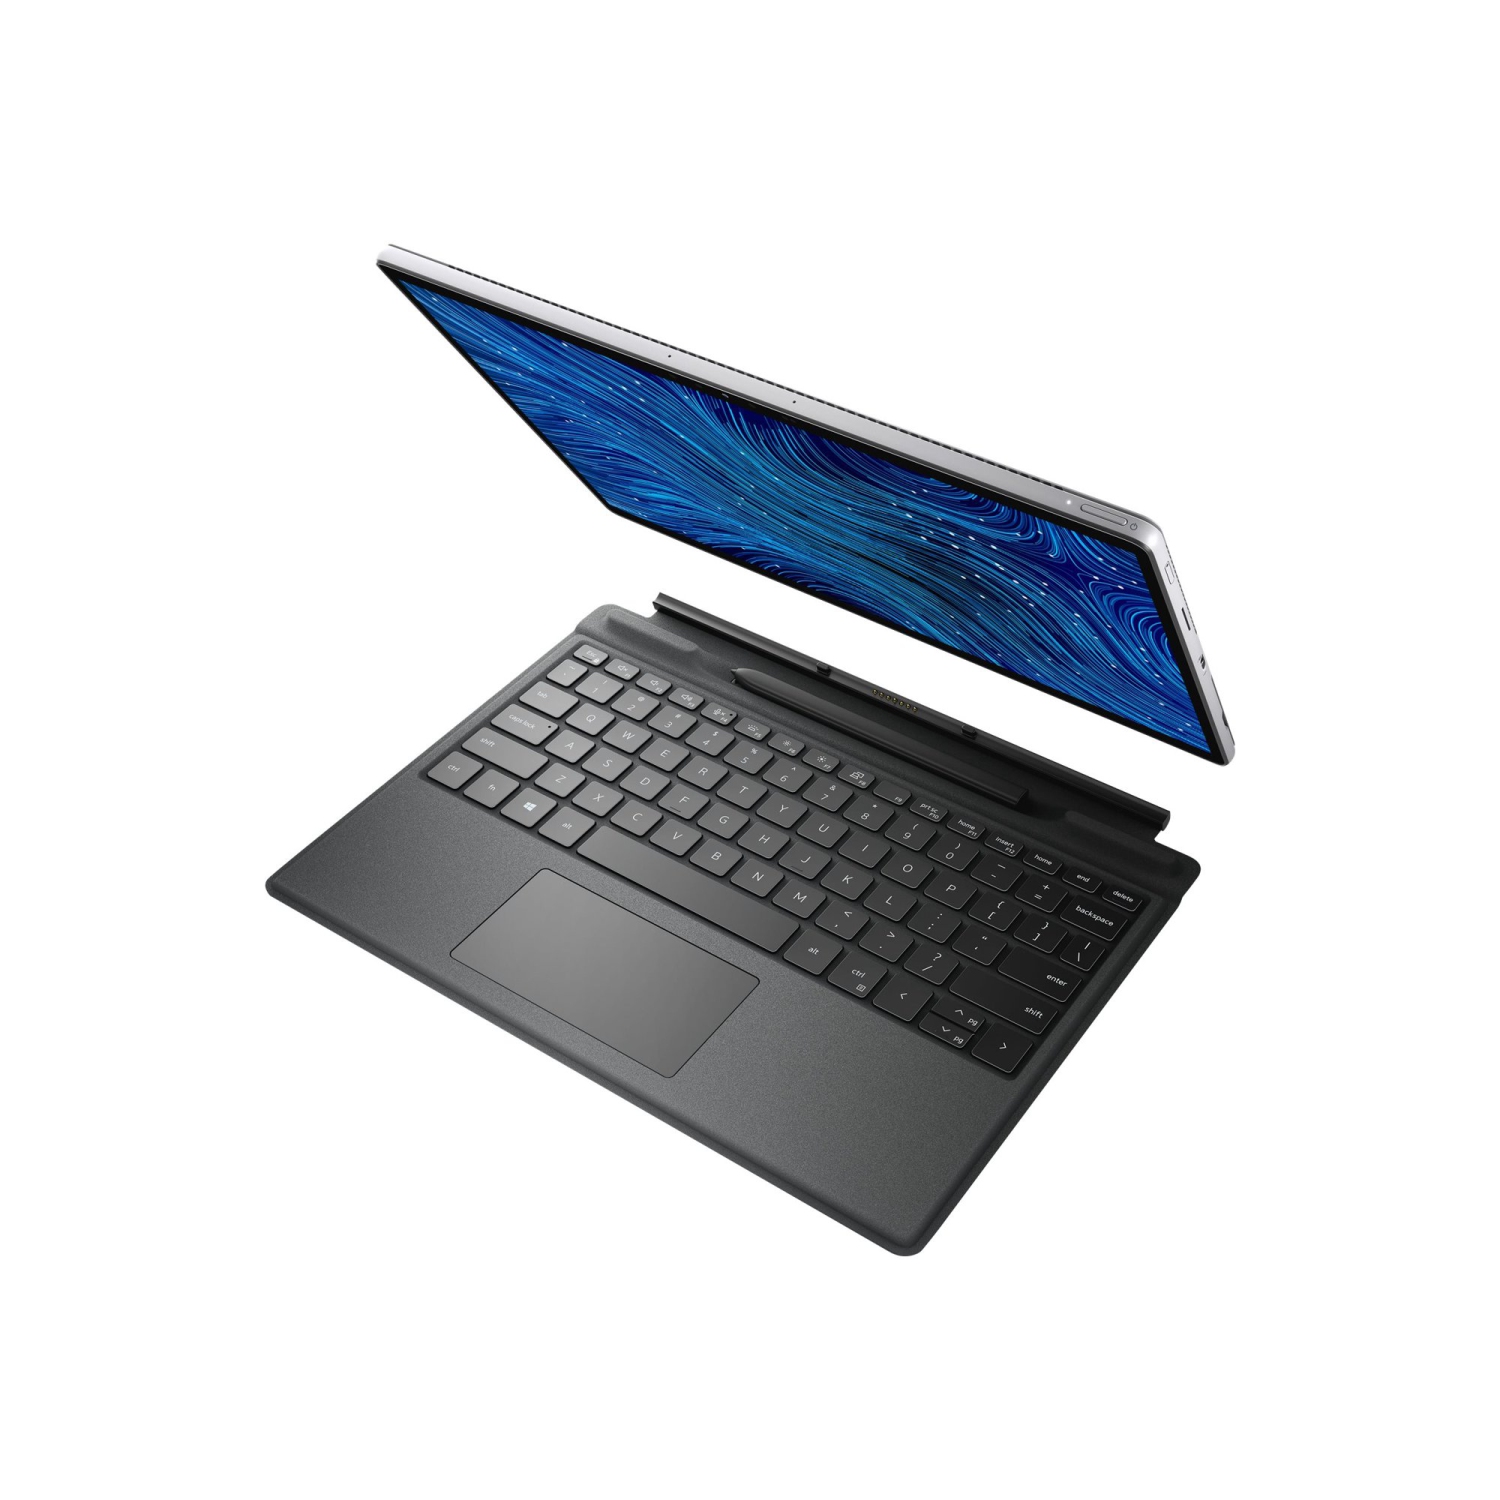 Refurbished (Excellent) Dell Latitude 7320 Detachable 13" FHD Touch Laptop - Intel Core i7-11th Gen /16 GB / 256 GB SSD / Win 10 Pro With KEYBOARD